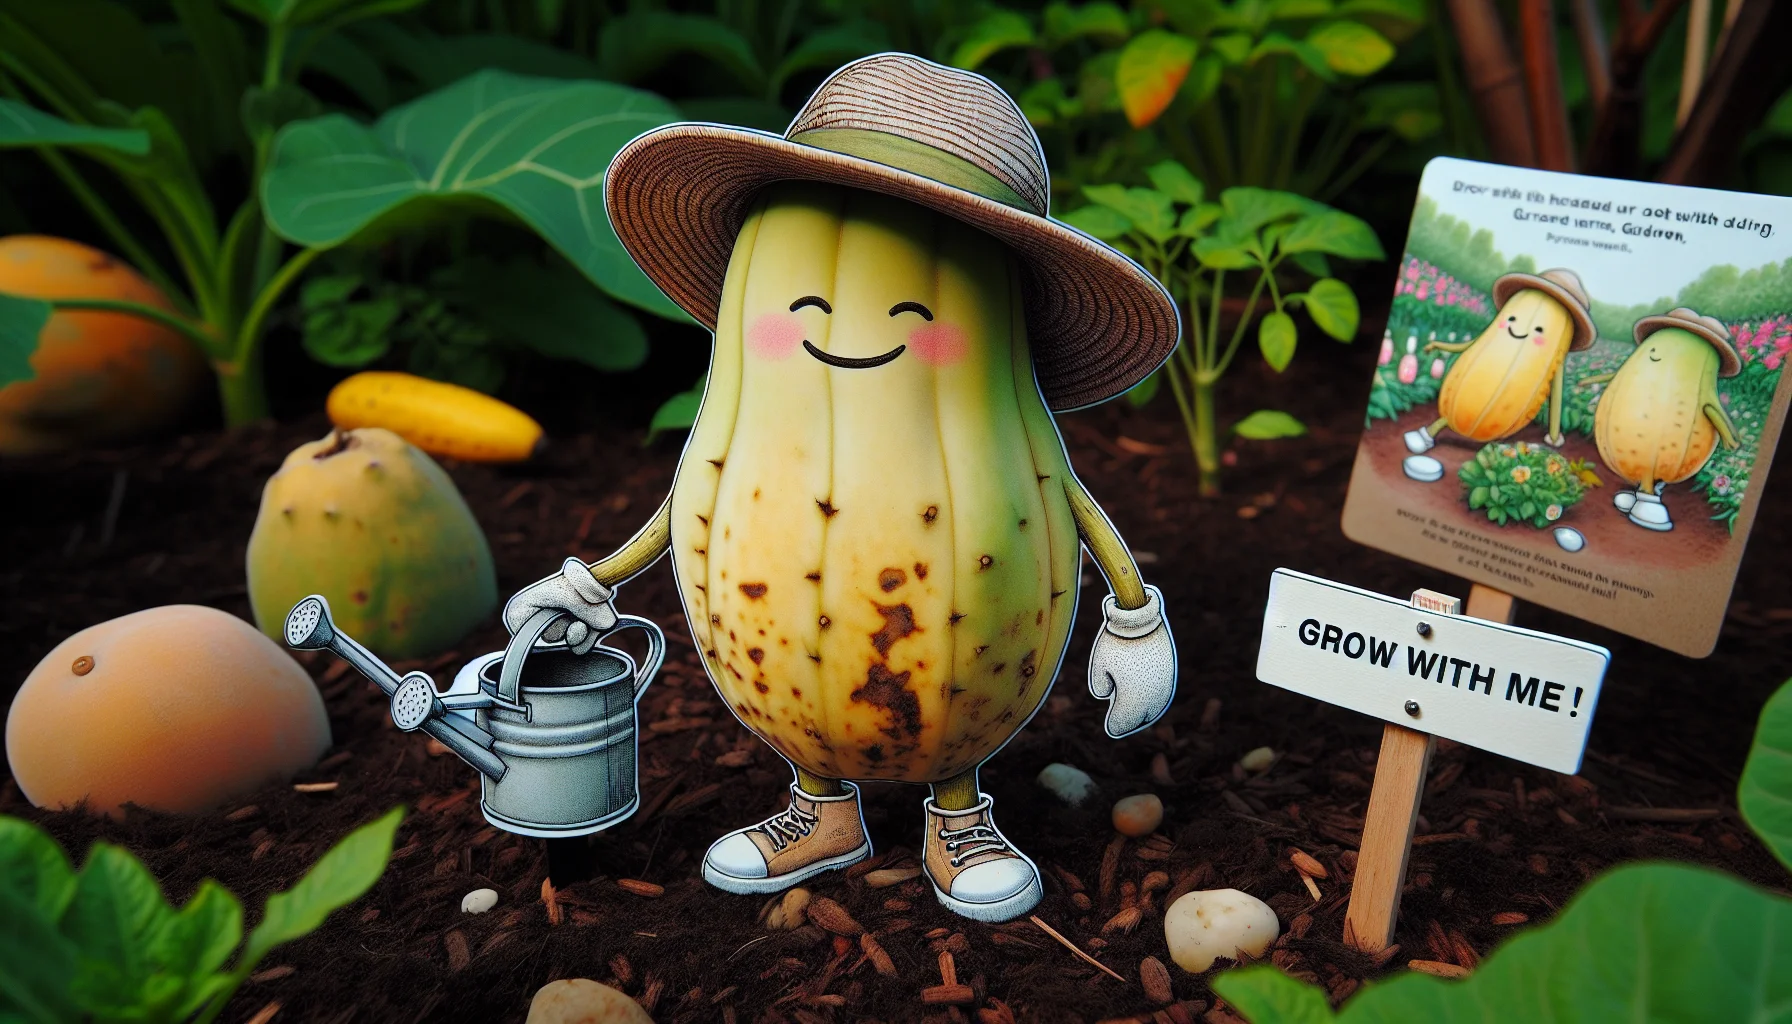 A detailed image showcasing the unique Indiana Banana, or Pawpaw fruit, grown in a home garden scenario. This fruit, known for its creamy, custard-like texture and unique flavor, has been humorously depicted. Perhaps it is wearing a cute, oversized gardener's hat and is holding a miniature watering can, as if it's encouraging people to take up gardening. There's a small signpost next to it with the words 'Grow with me!' written on it. The background might include a variety of common garden vegetables and fruits, all hinting at the rewards and joy of home gardening.